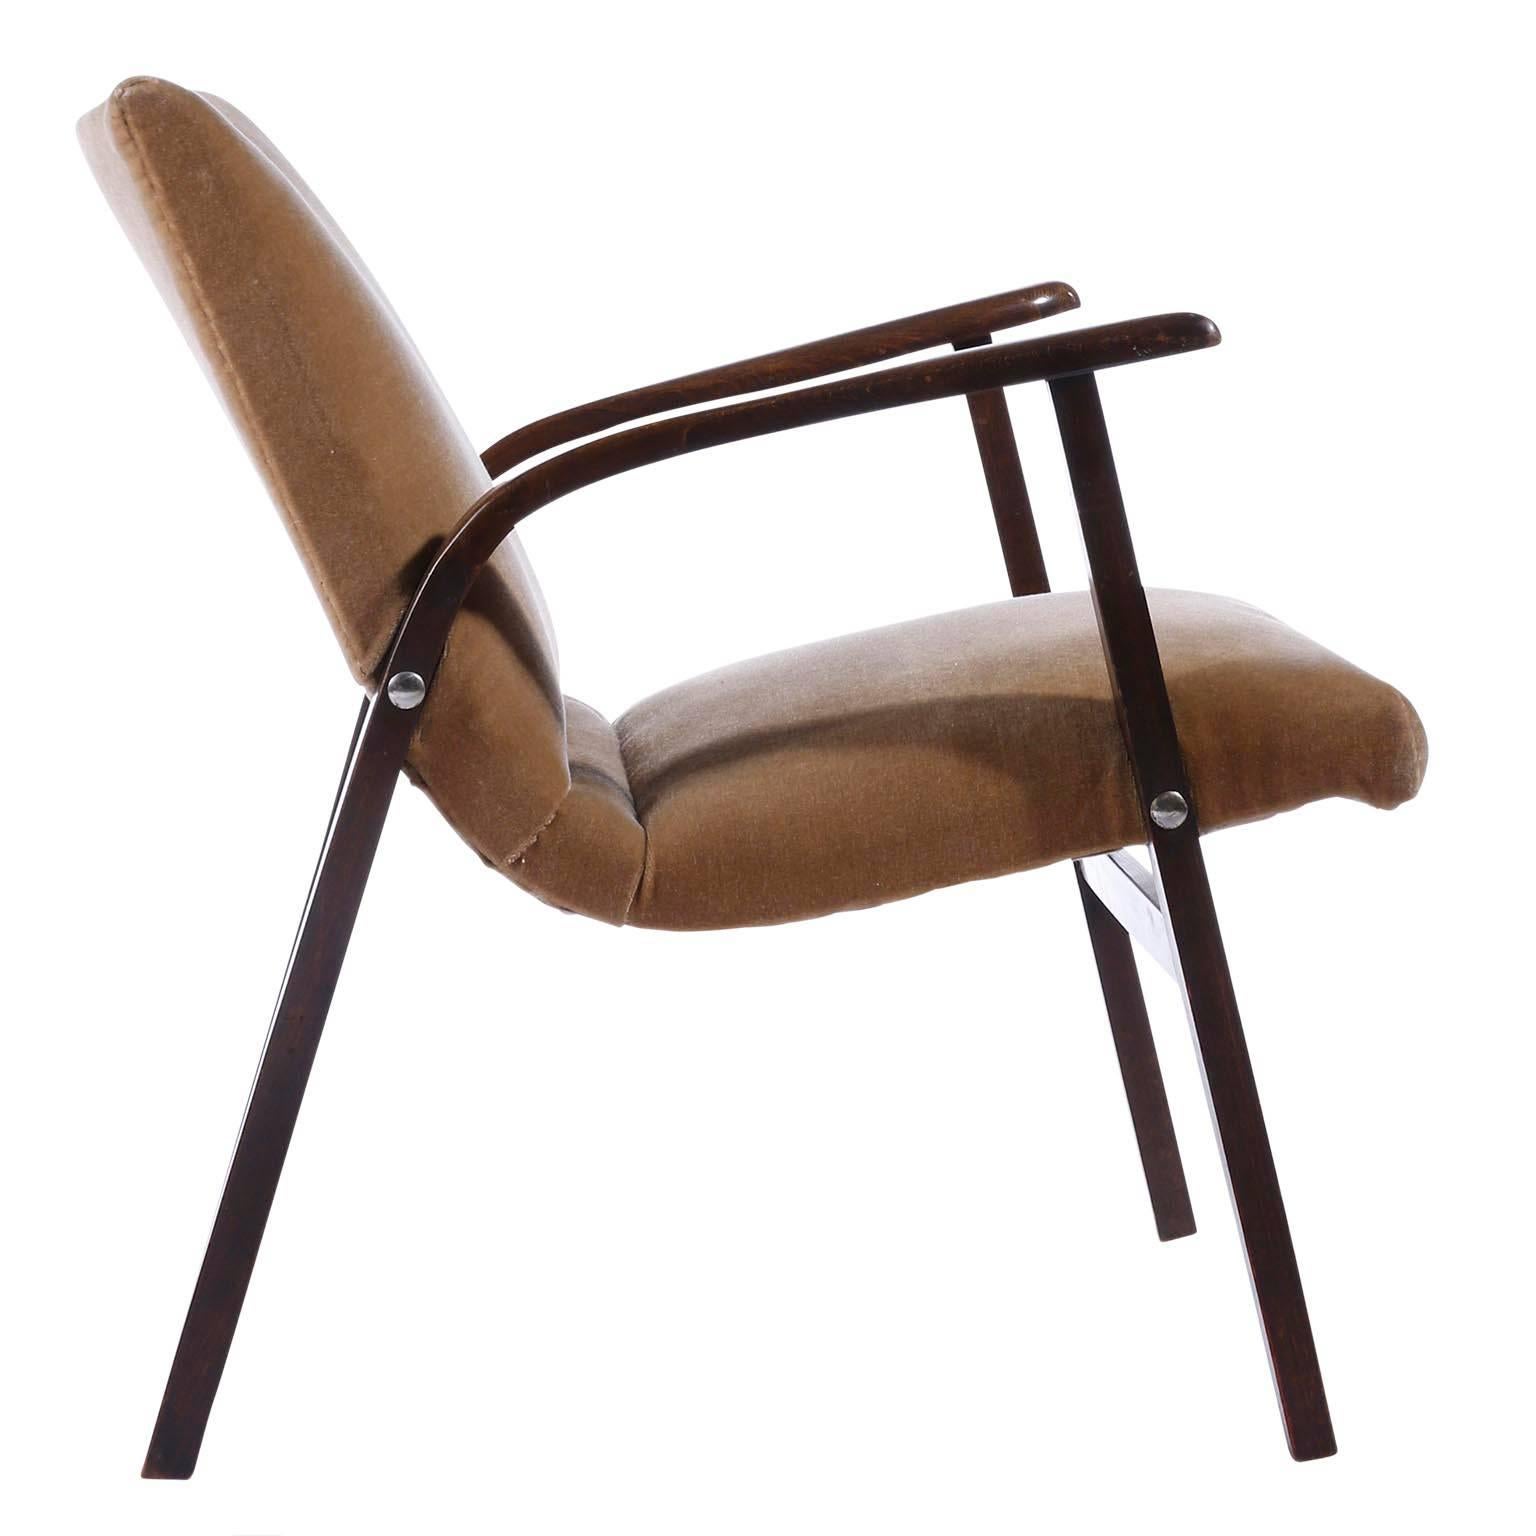 Mid-20th Century Pair of Roland Rainer Lounge Chairs Armchairs Cafe Ritter, Velvet Wood, 1950s For Sale